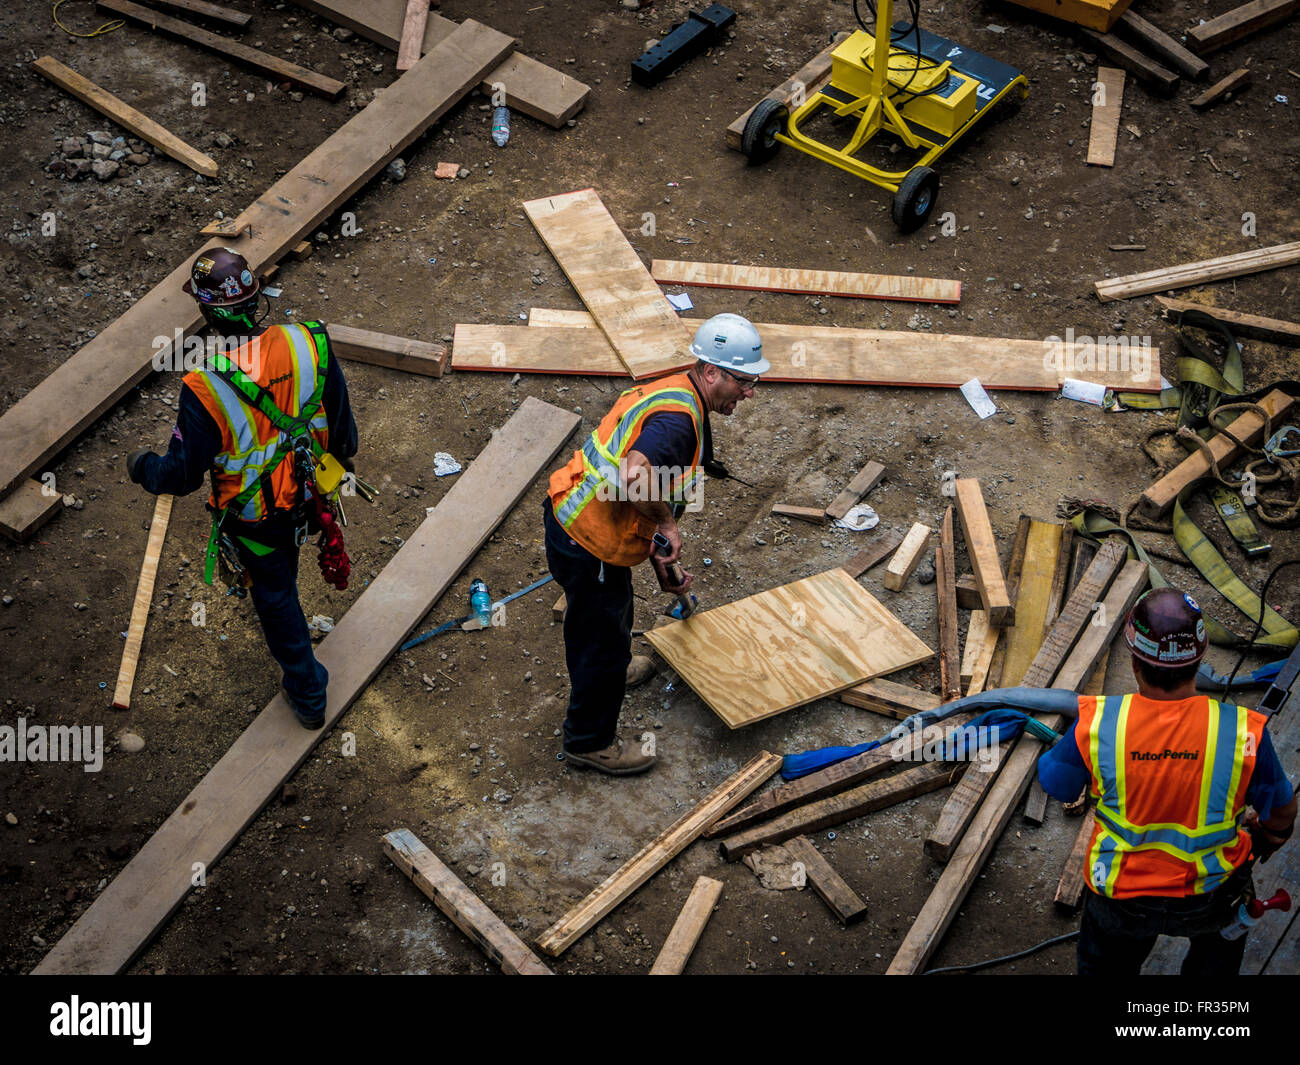 https://c8.alamy.com/comp/FR35PM/workers-on-construction-site-new-york-city-usa-FR35PM.jpg